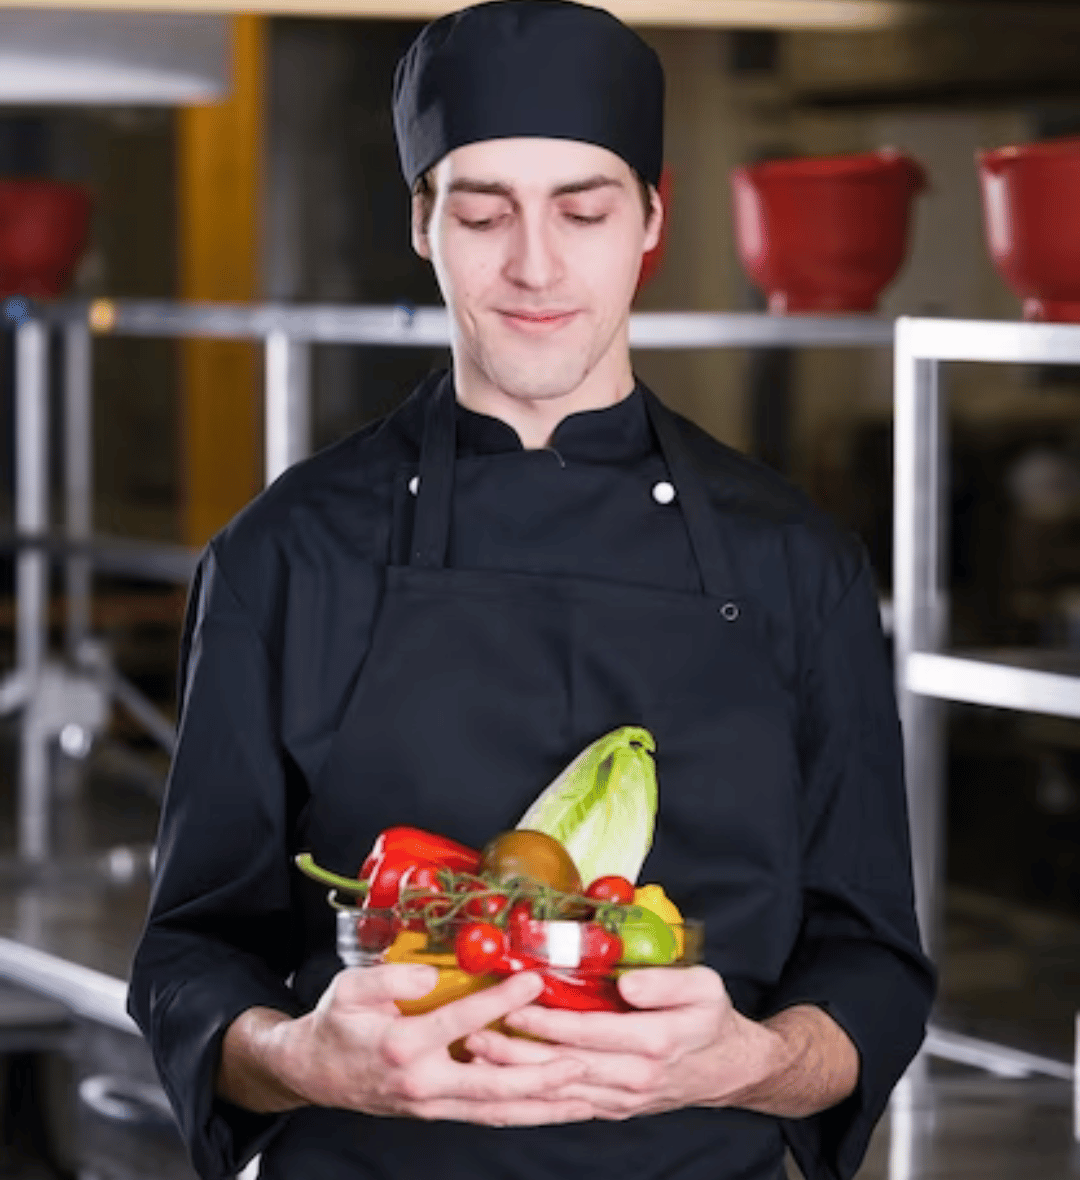 Shop wholesale cooking and restaurants uniforms from top suppliers in the industry.